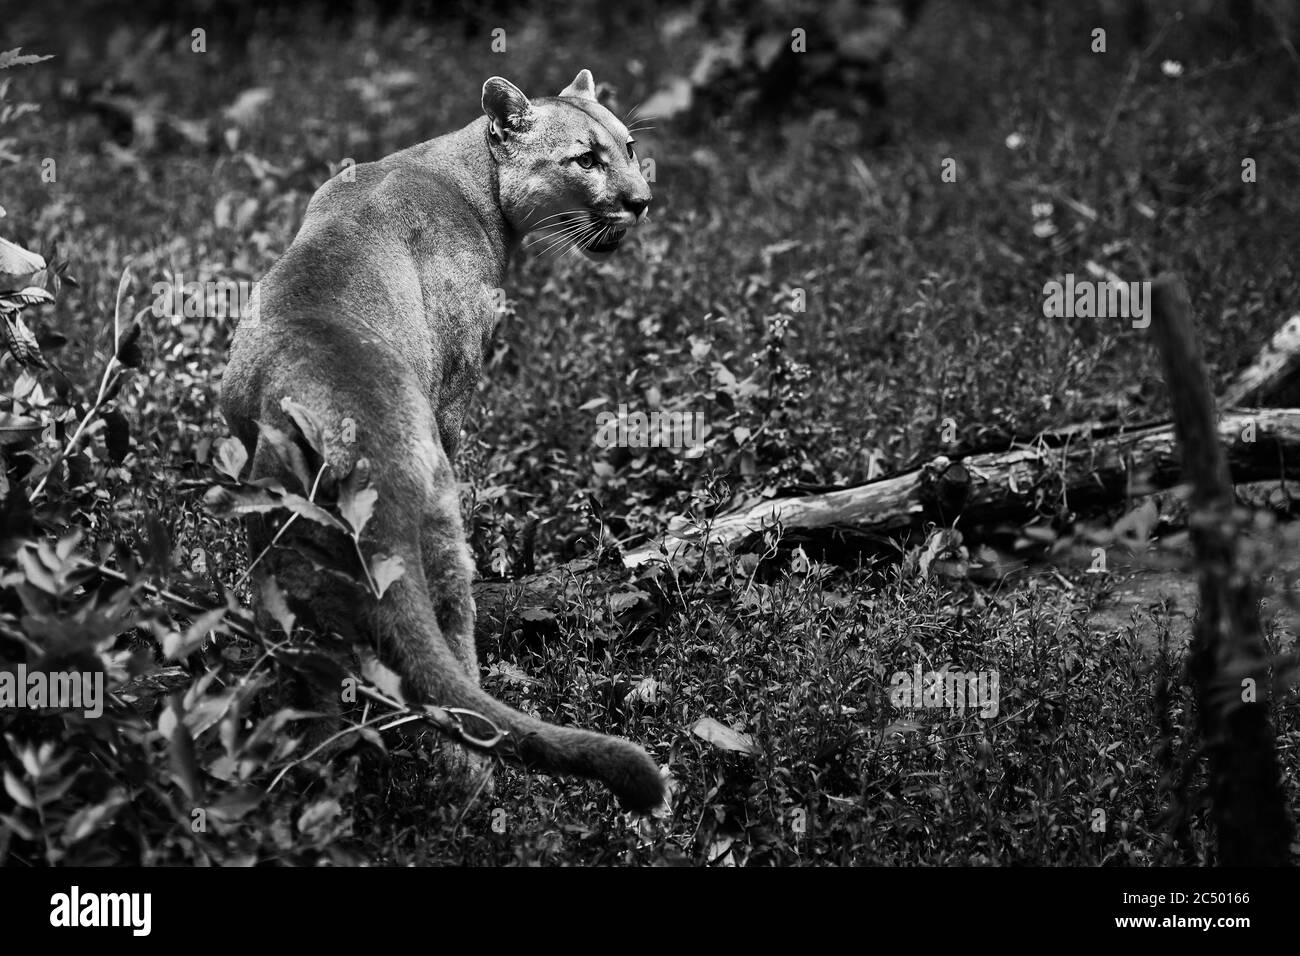 Portrait of Beautiful Puma. Cougar, mountain lion, puma, panther, striking pose, scene in the woods, wildlife America. Stock Photo